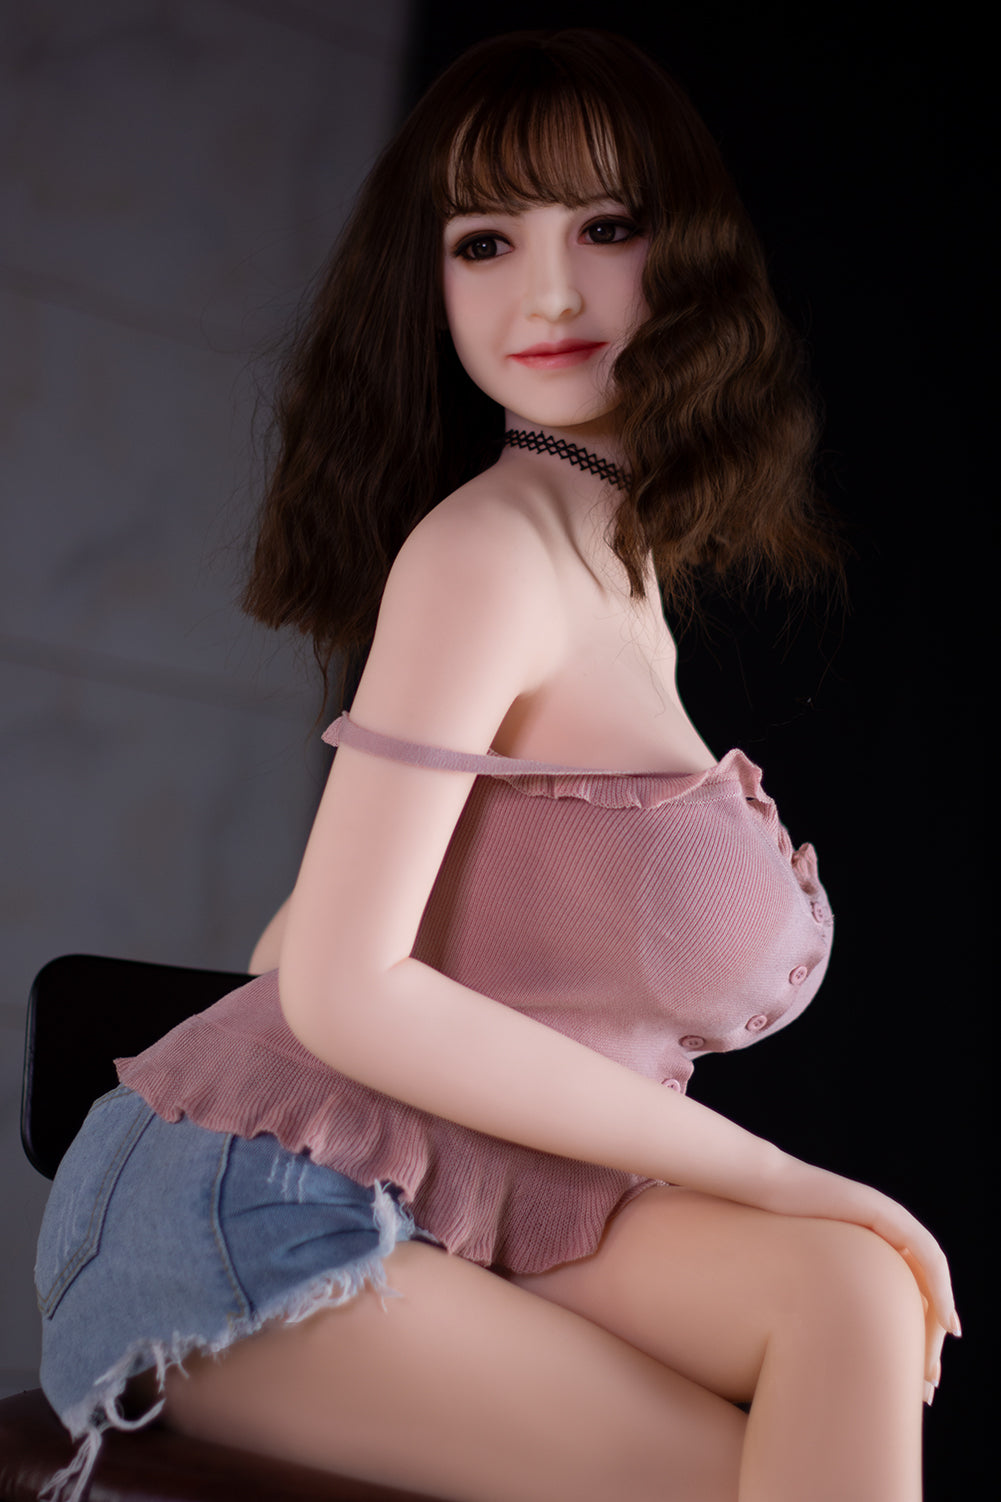 US Stock - Big Breast Annette Cute Woman 158cm #179 Realistic TPE Sex Doll Adult TPE Love Doll